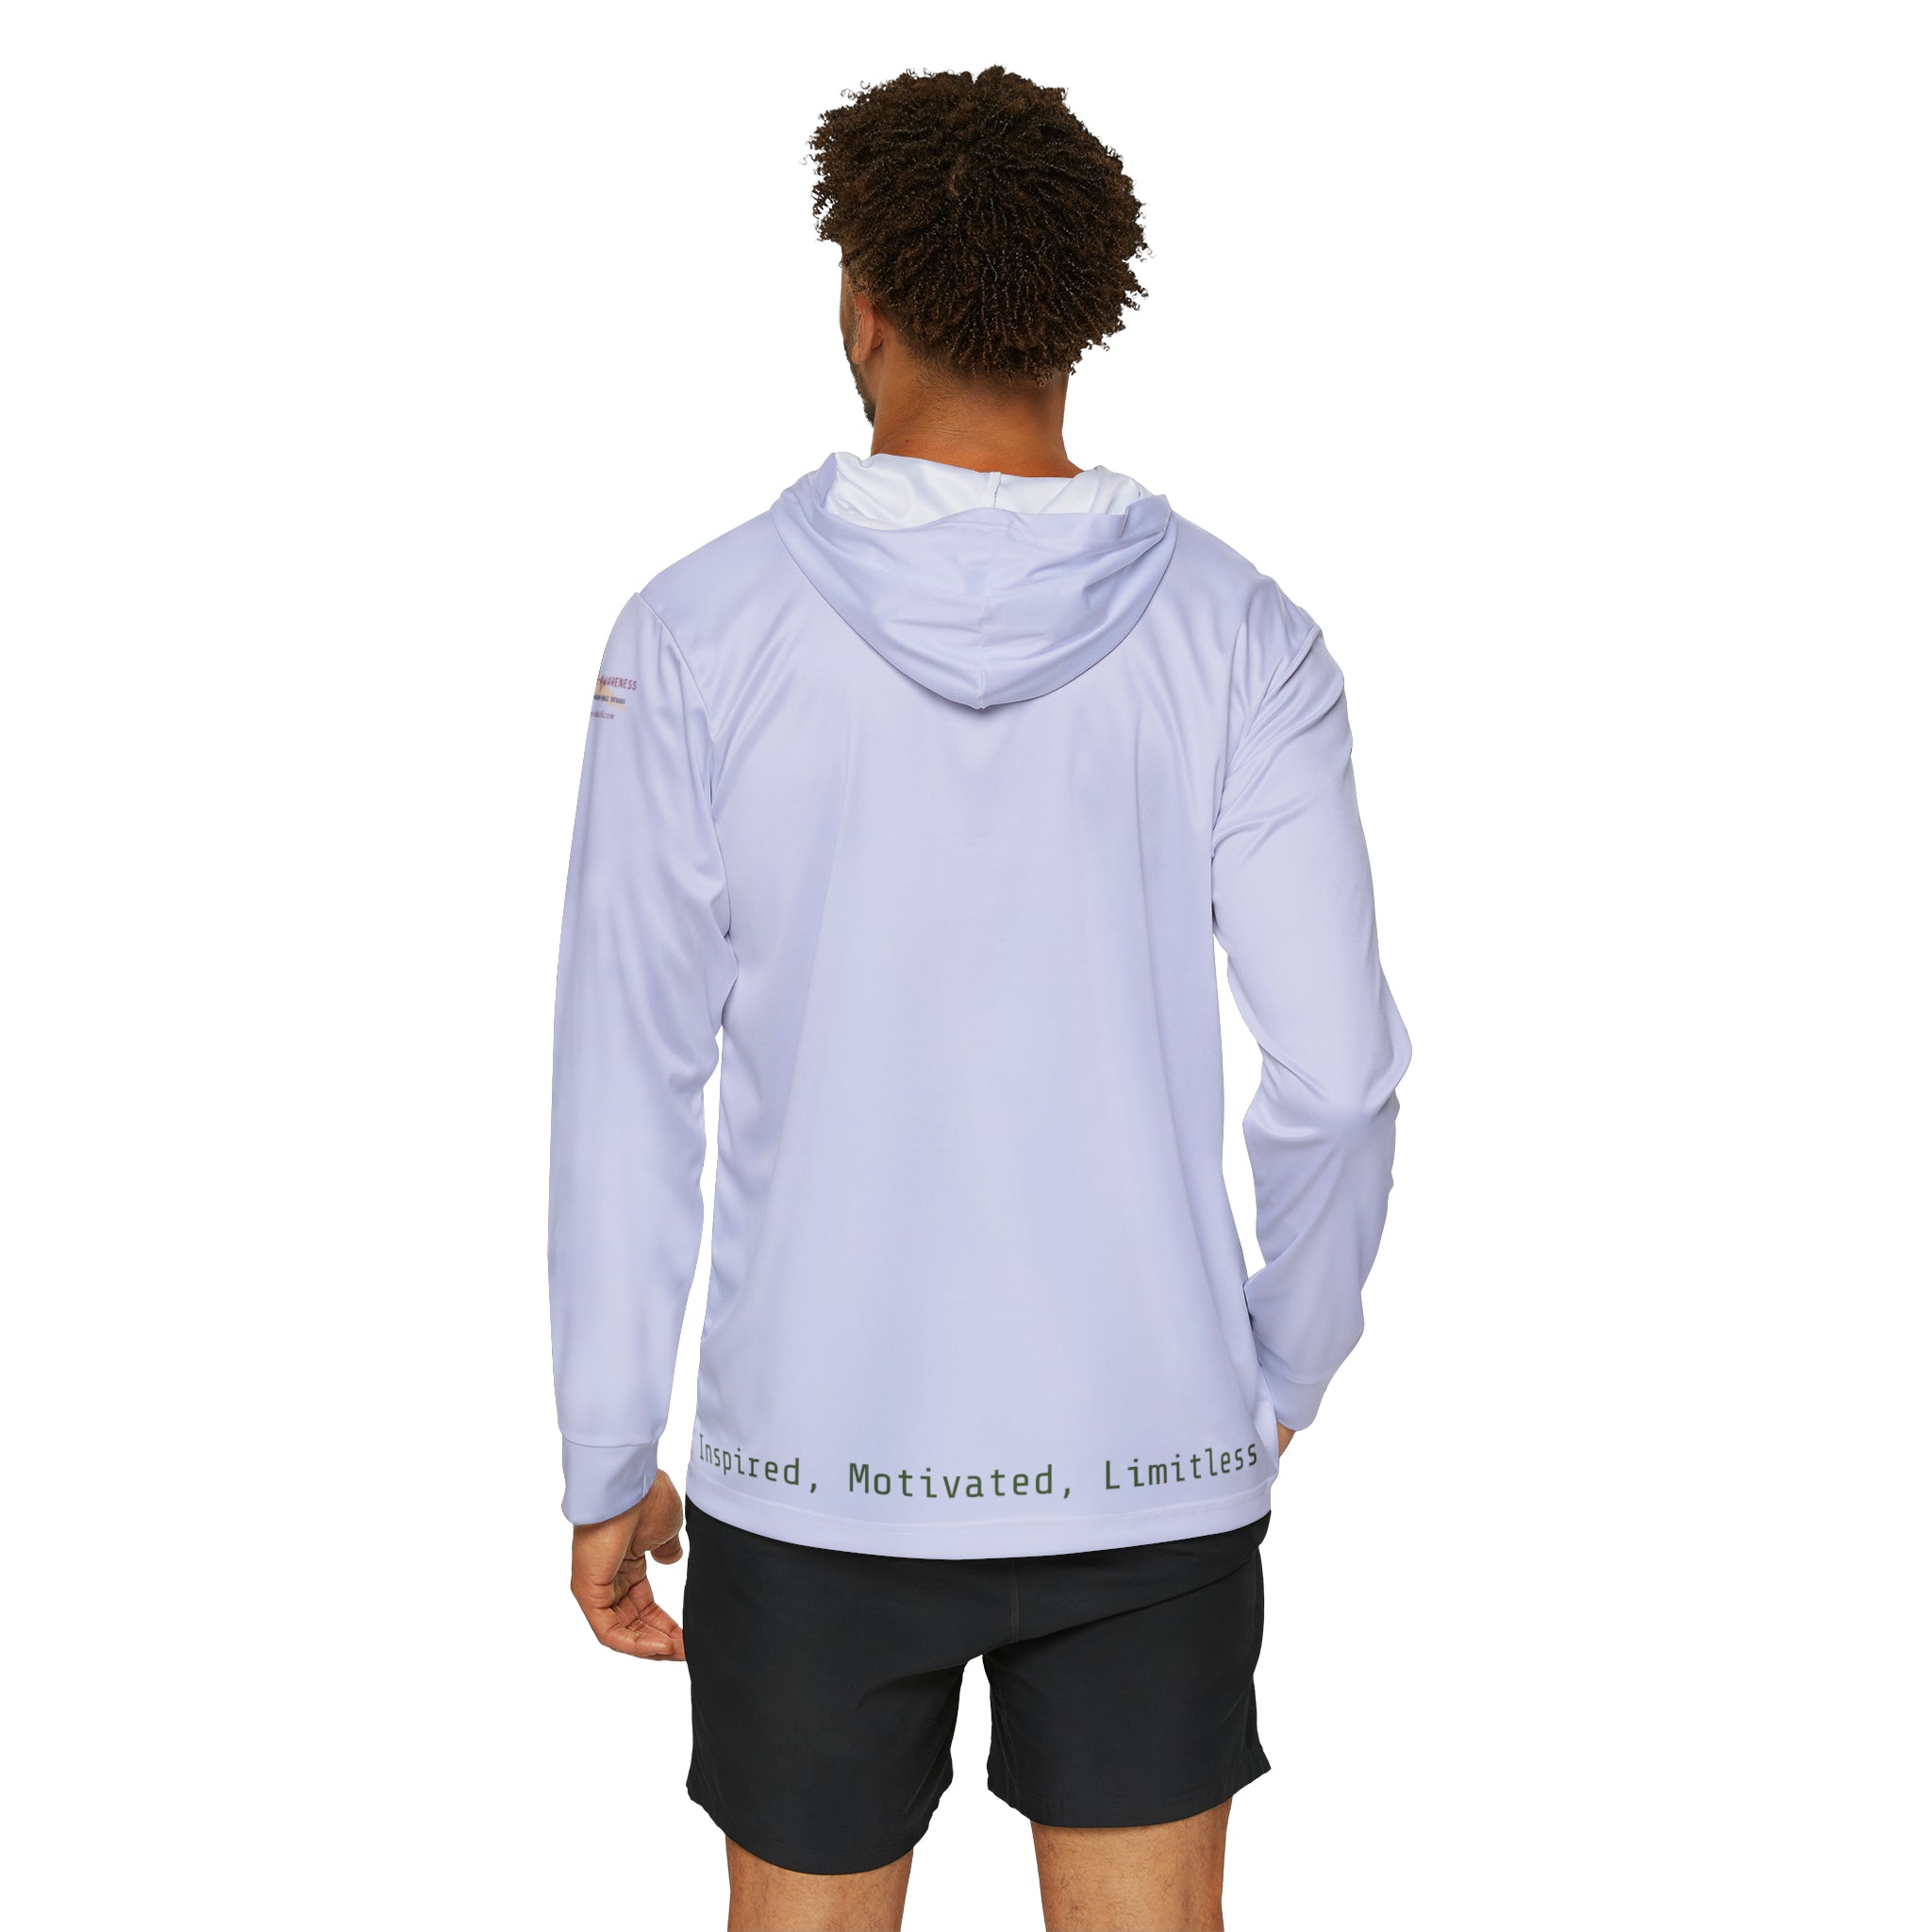 Fearless Men's Warmup Hoodie: Conquer Your Fears Activewear Durable Fabric Made in USA Men's Hoodie Mental Health Support Moisture-wicking Performance Apparel Quality Control Sports Warmup UPF 50+ All Over Prints 12132511352399926386_2048 Printify